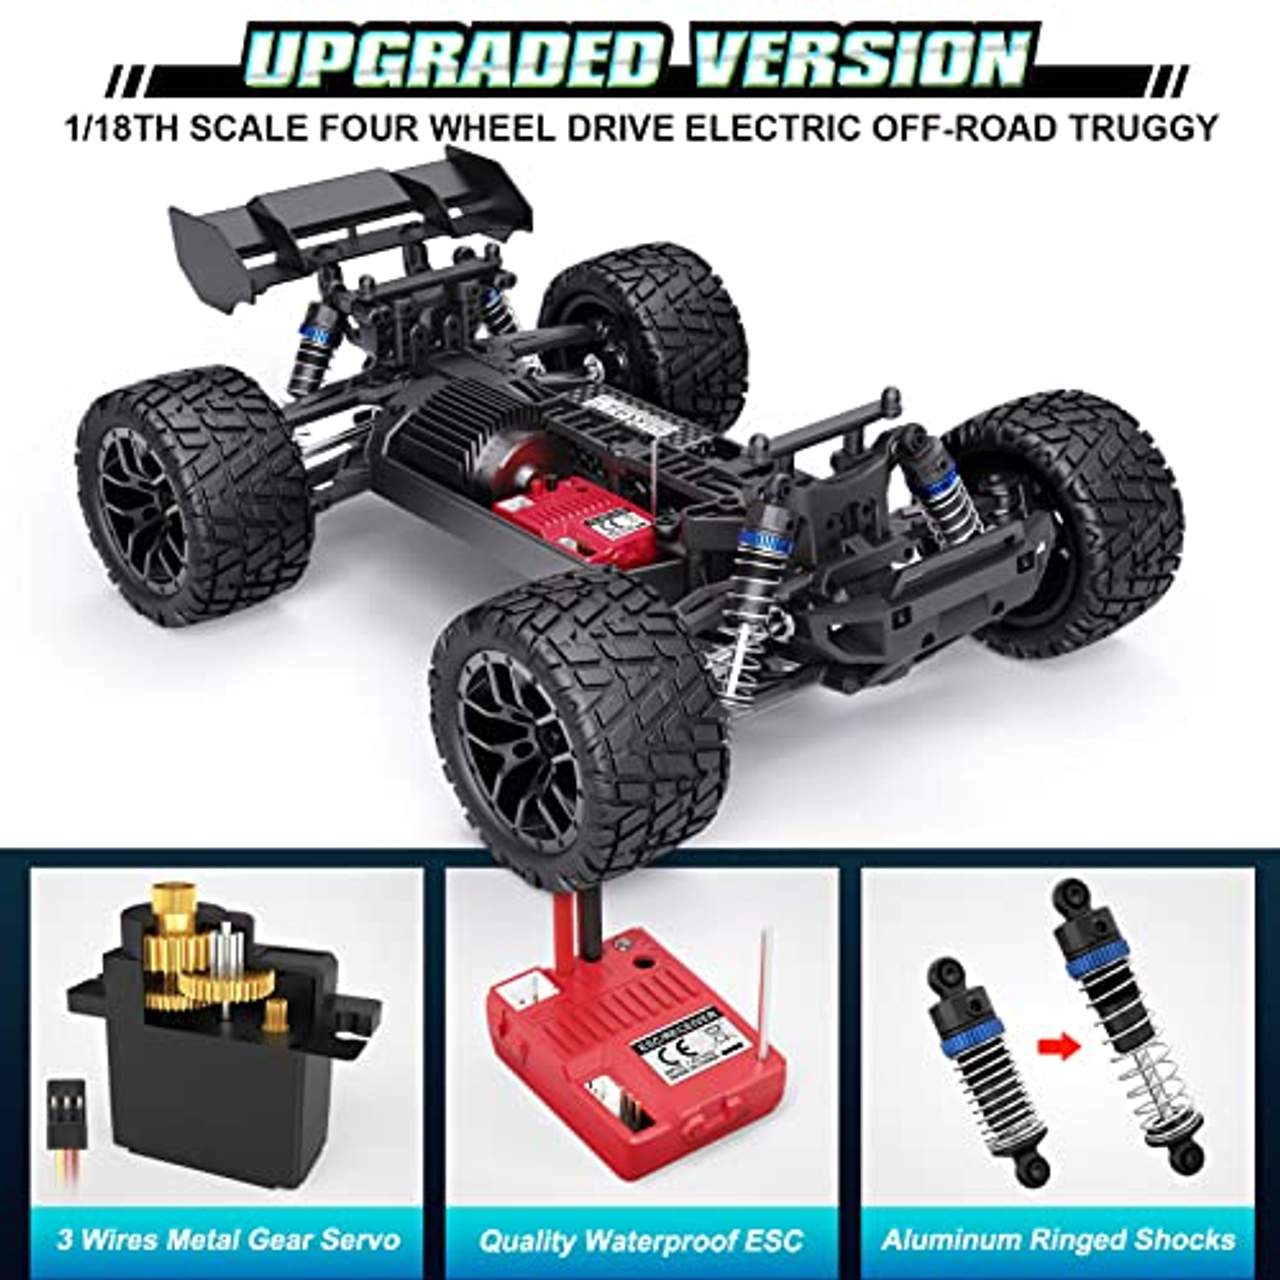 HAIBOXING Ferngesteuertes Auto 2,4 GHz 1:18 Proportional 4WD 36+ km/h Hobby RC Auto Offroad Monster RC Truck